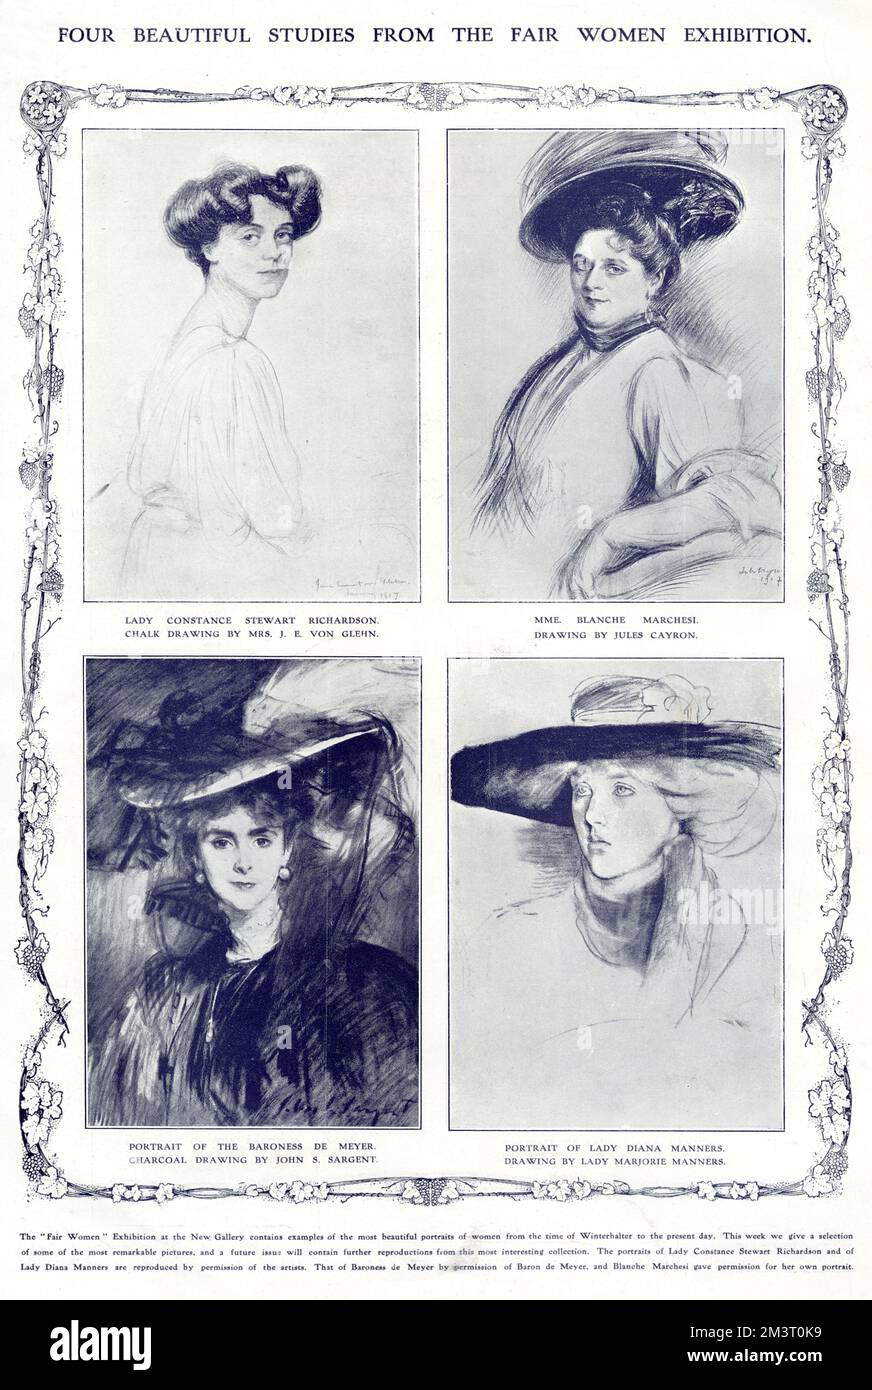 Four beautiful portrait studies from the Fair Women Exhibition. (clockwise from top left): Lady Constance Stewart Richardson - chalk drawing by Mrs J E Von Glehn, Mademoiselle Blanche Marchesi - drawing by Jules Cayron, Lady Diana Manners - drawing by Lady Marjorie Manners and The Baroness de Meyer - charcoal drawing by John Singer Sargent.  1908 Stock Photo